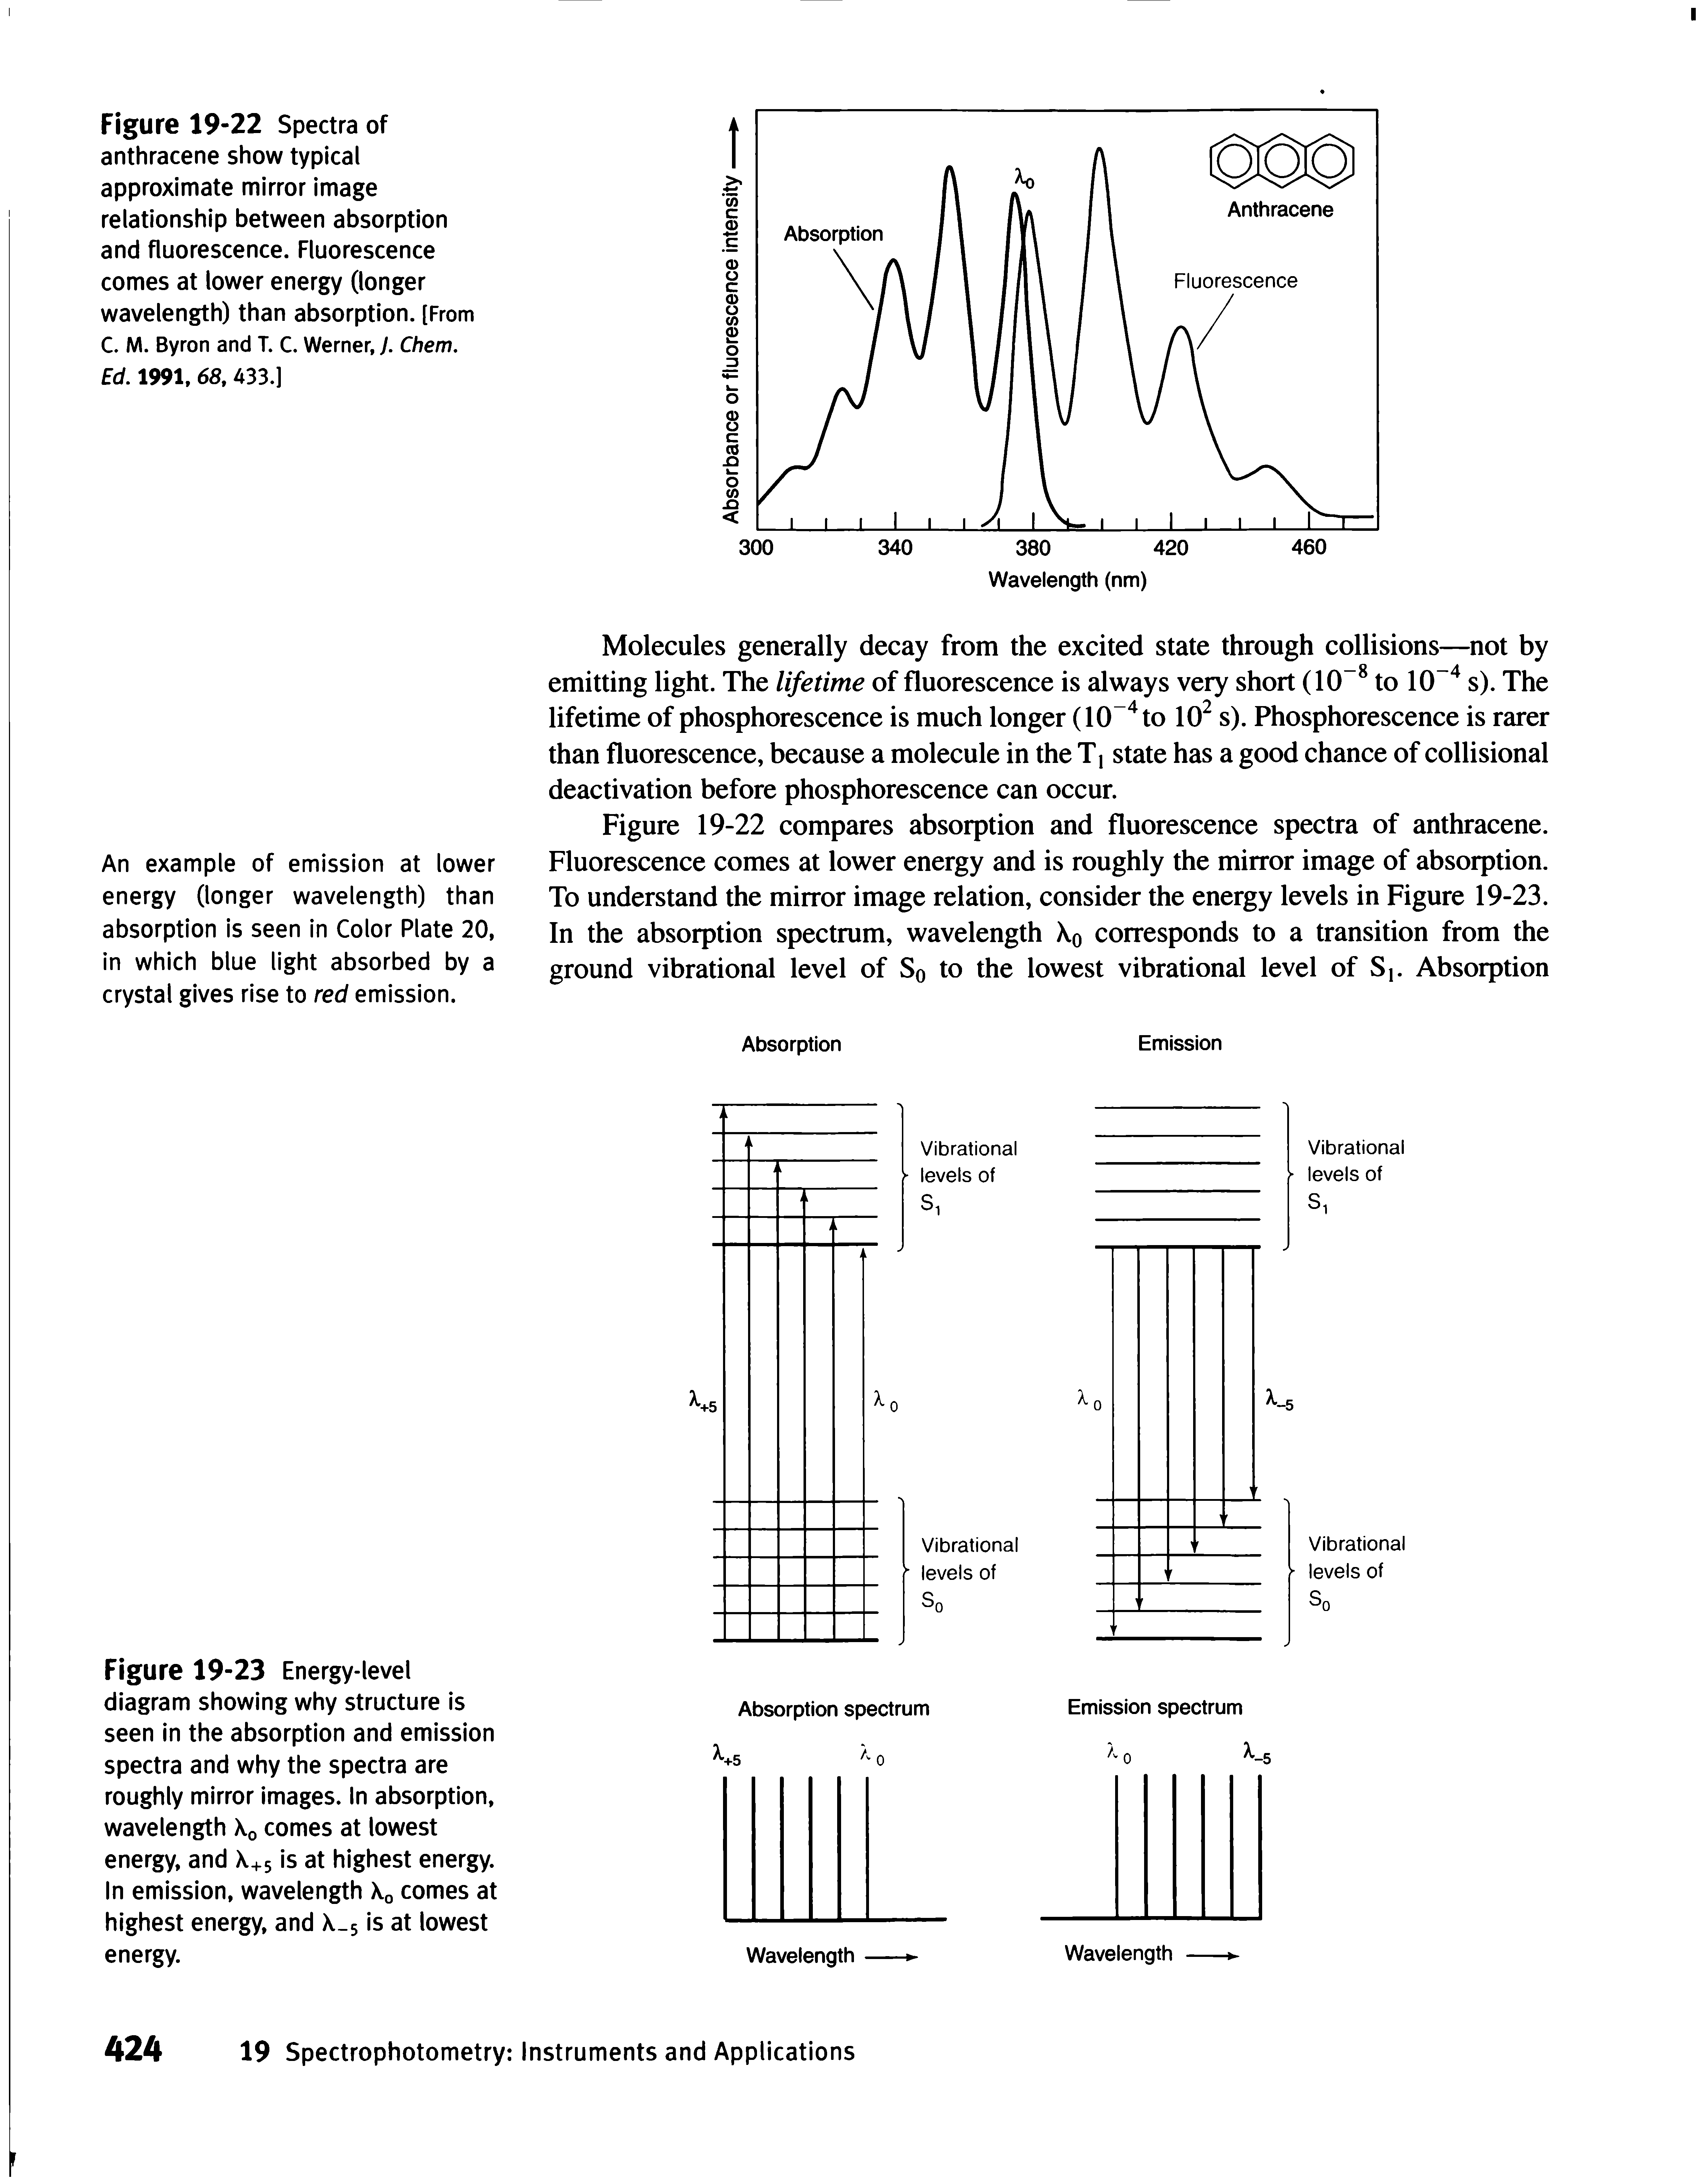 Figure 19-22 compares absorption and fluorescence spectra of anthracene. Fluorescence comes at lower energy and is roughly the mirror image of absorption. To understand the mirror image relation, consider the energy levels in Figure 19-23. In the absorption spectrum, wavelength Xq corresponds to a transition from the ground vibrational level of Sq to the lowest vibrational level of Absorption...